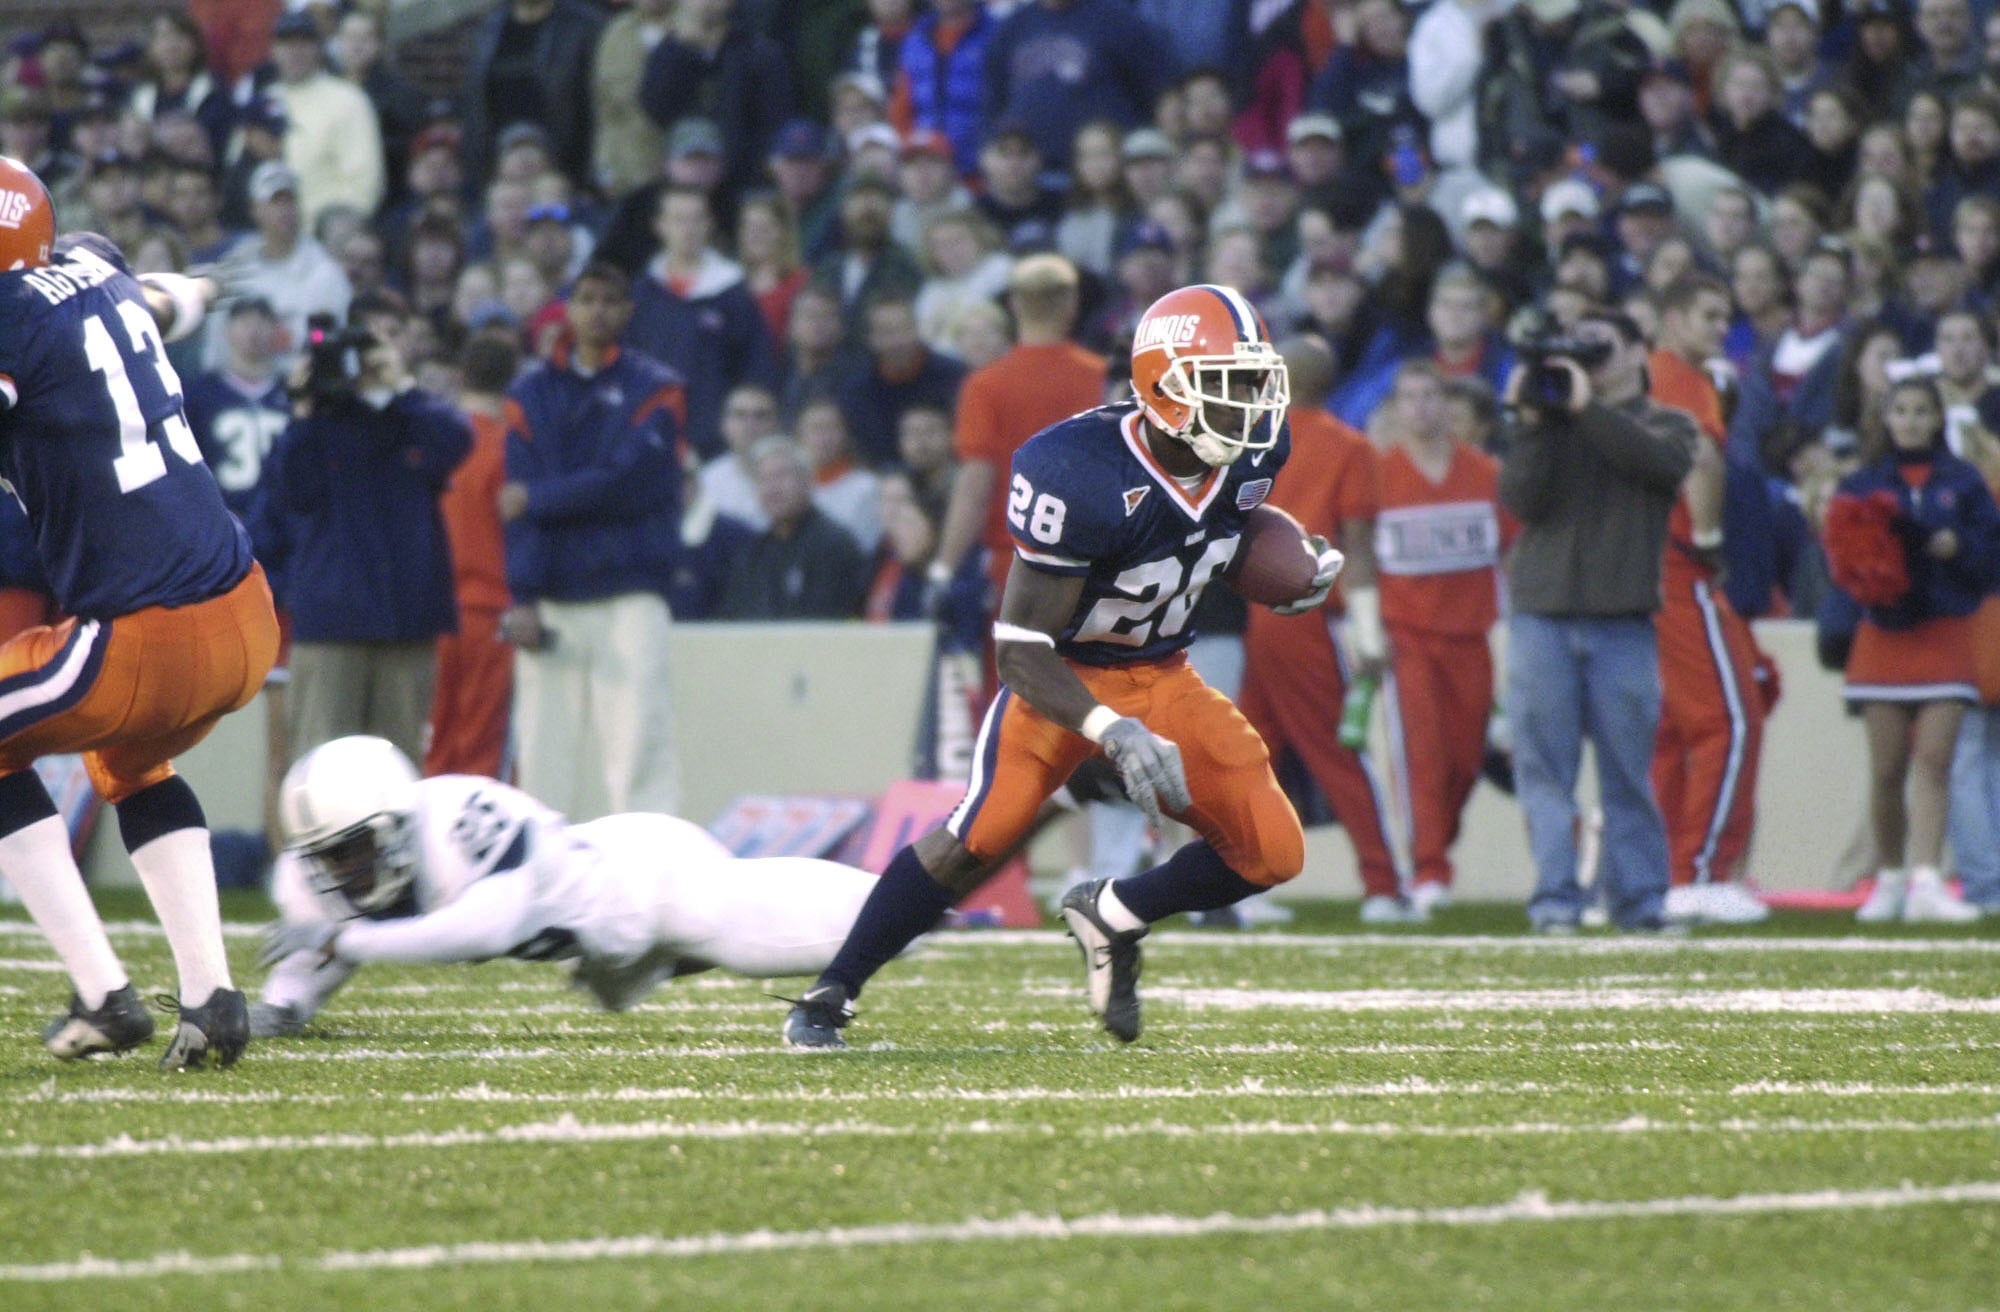 Eugene Wilson II, the father of Gators' sophomore receiver Eugene III, was a second-team All-America safety at Illinois in 2002 and second-round NFL draft pick in 2003 by the New England Patriots. (University of Illinois athletics)